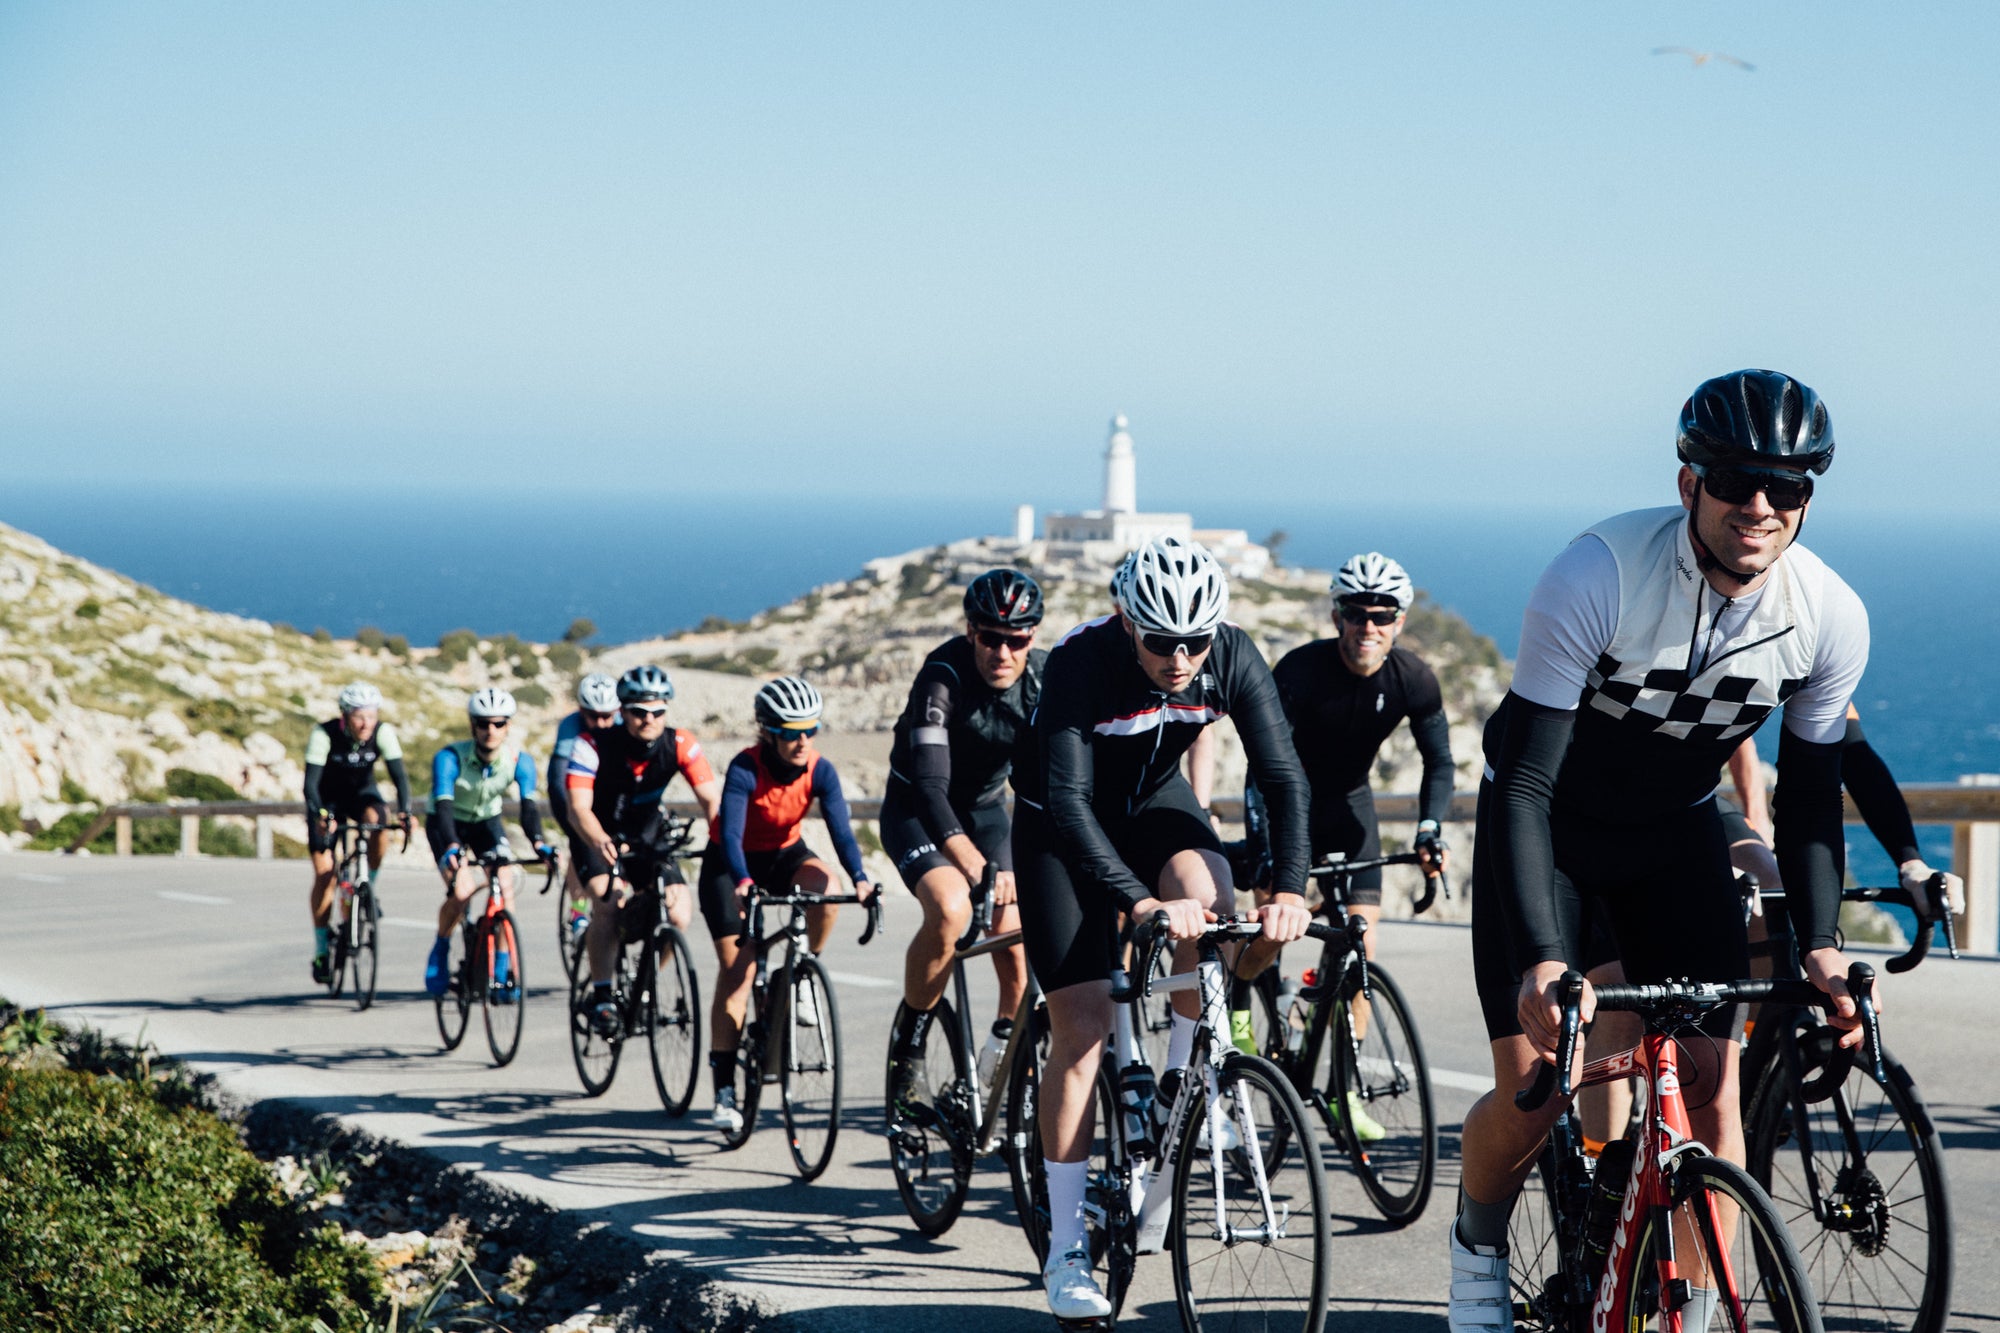 BoC Group Ride Mallorca in Pictures